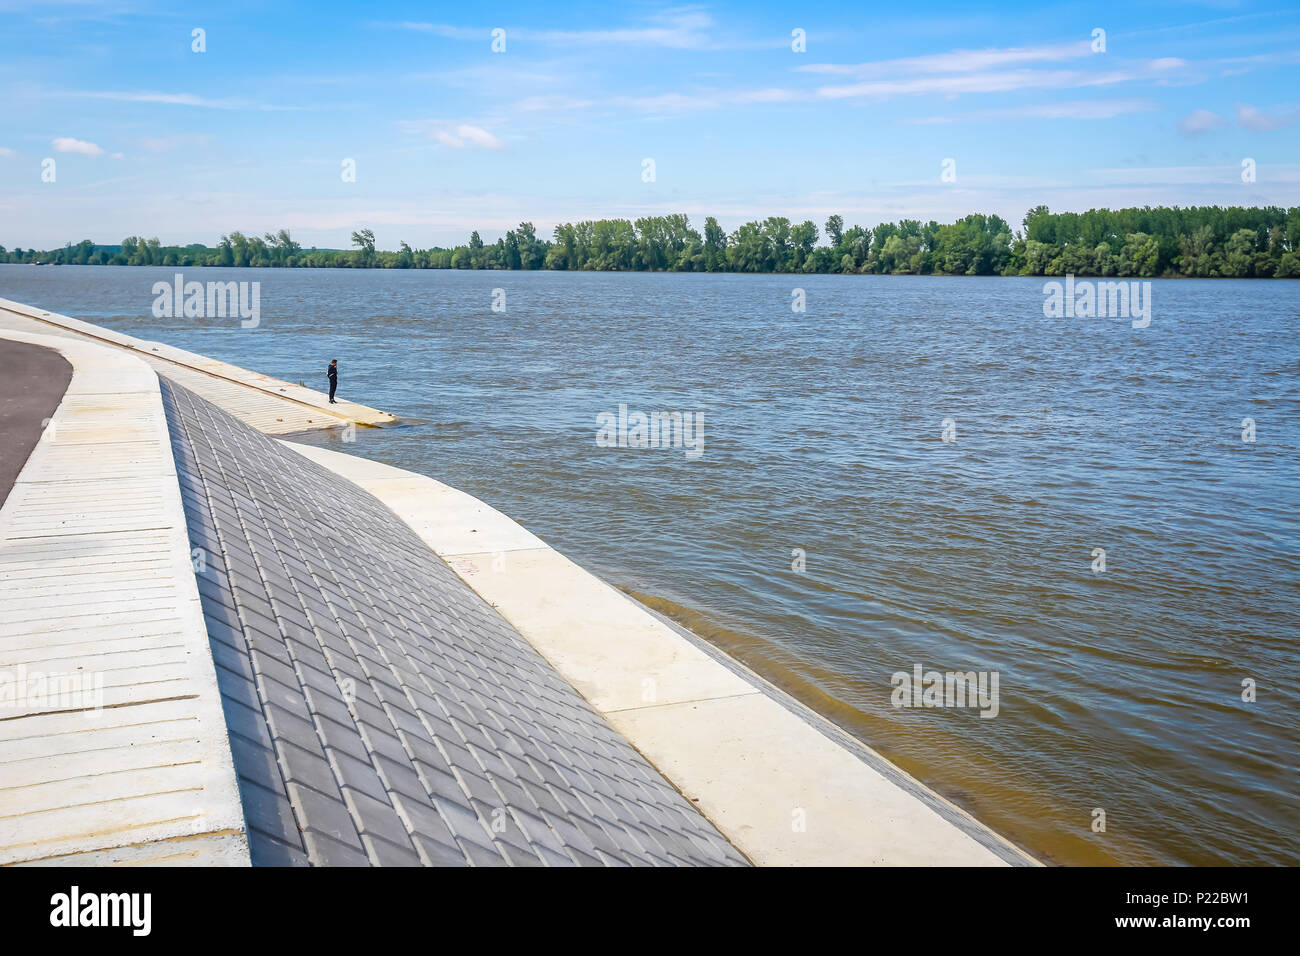 Man standing on a new embankment on the shore of river Danube in Vukovar, Croatia. Danube is Europes second longest river. Stock Photo